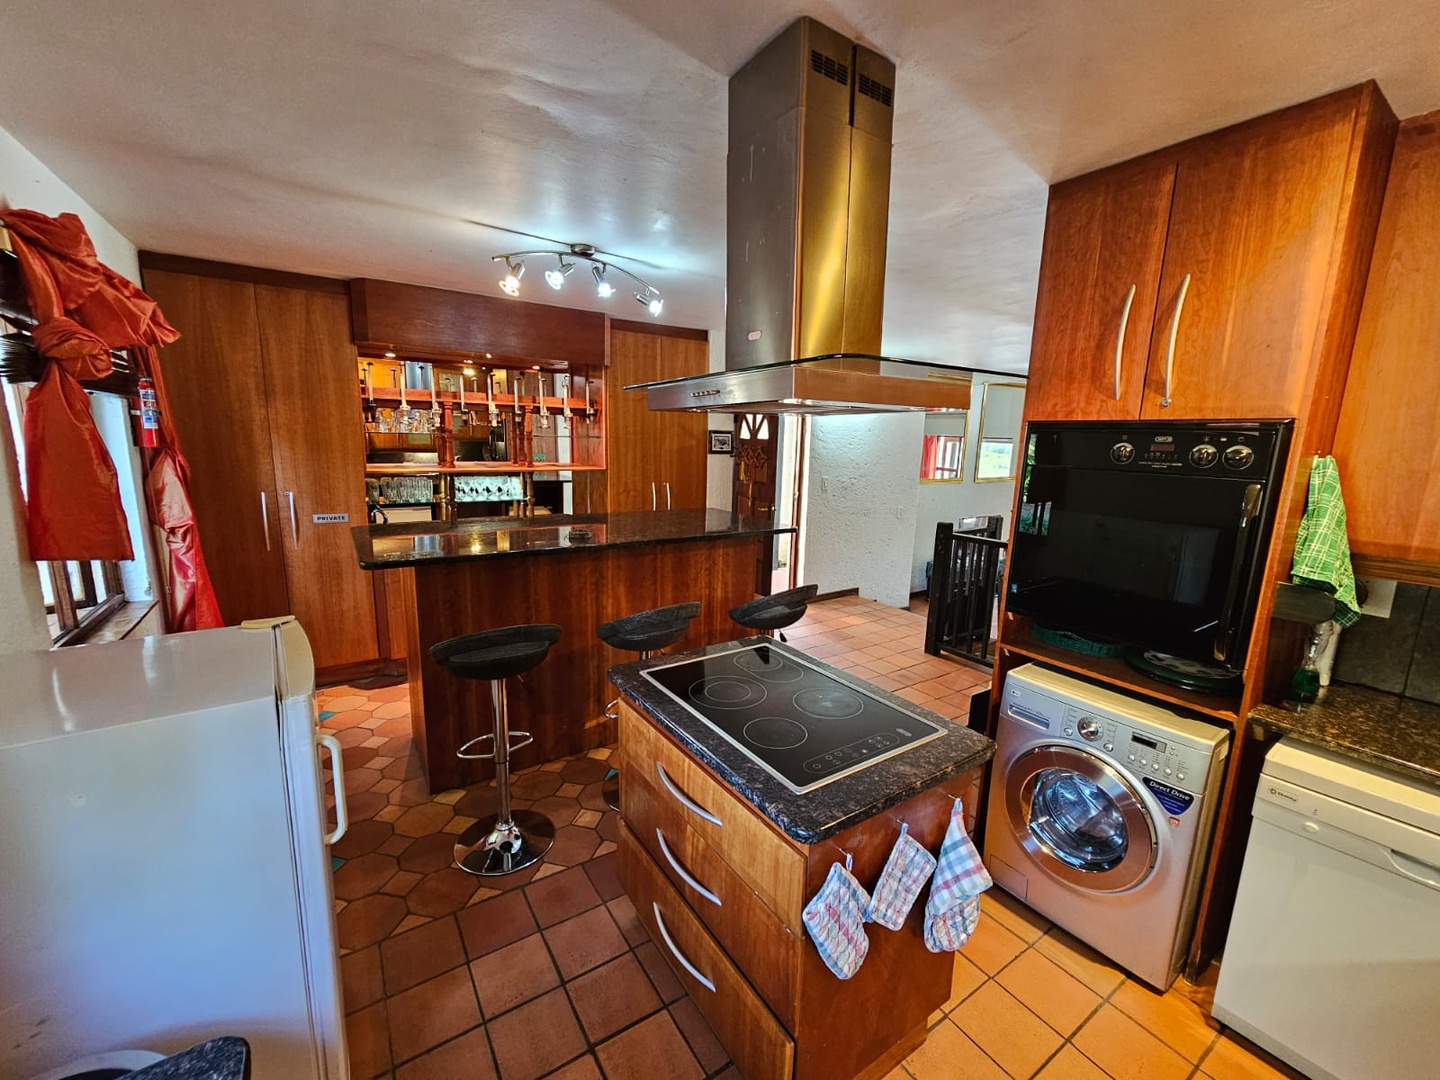 House in Ile du Lac - Kitchen and bar